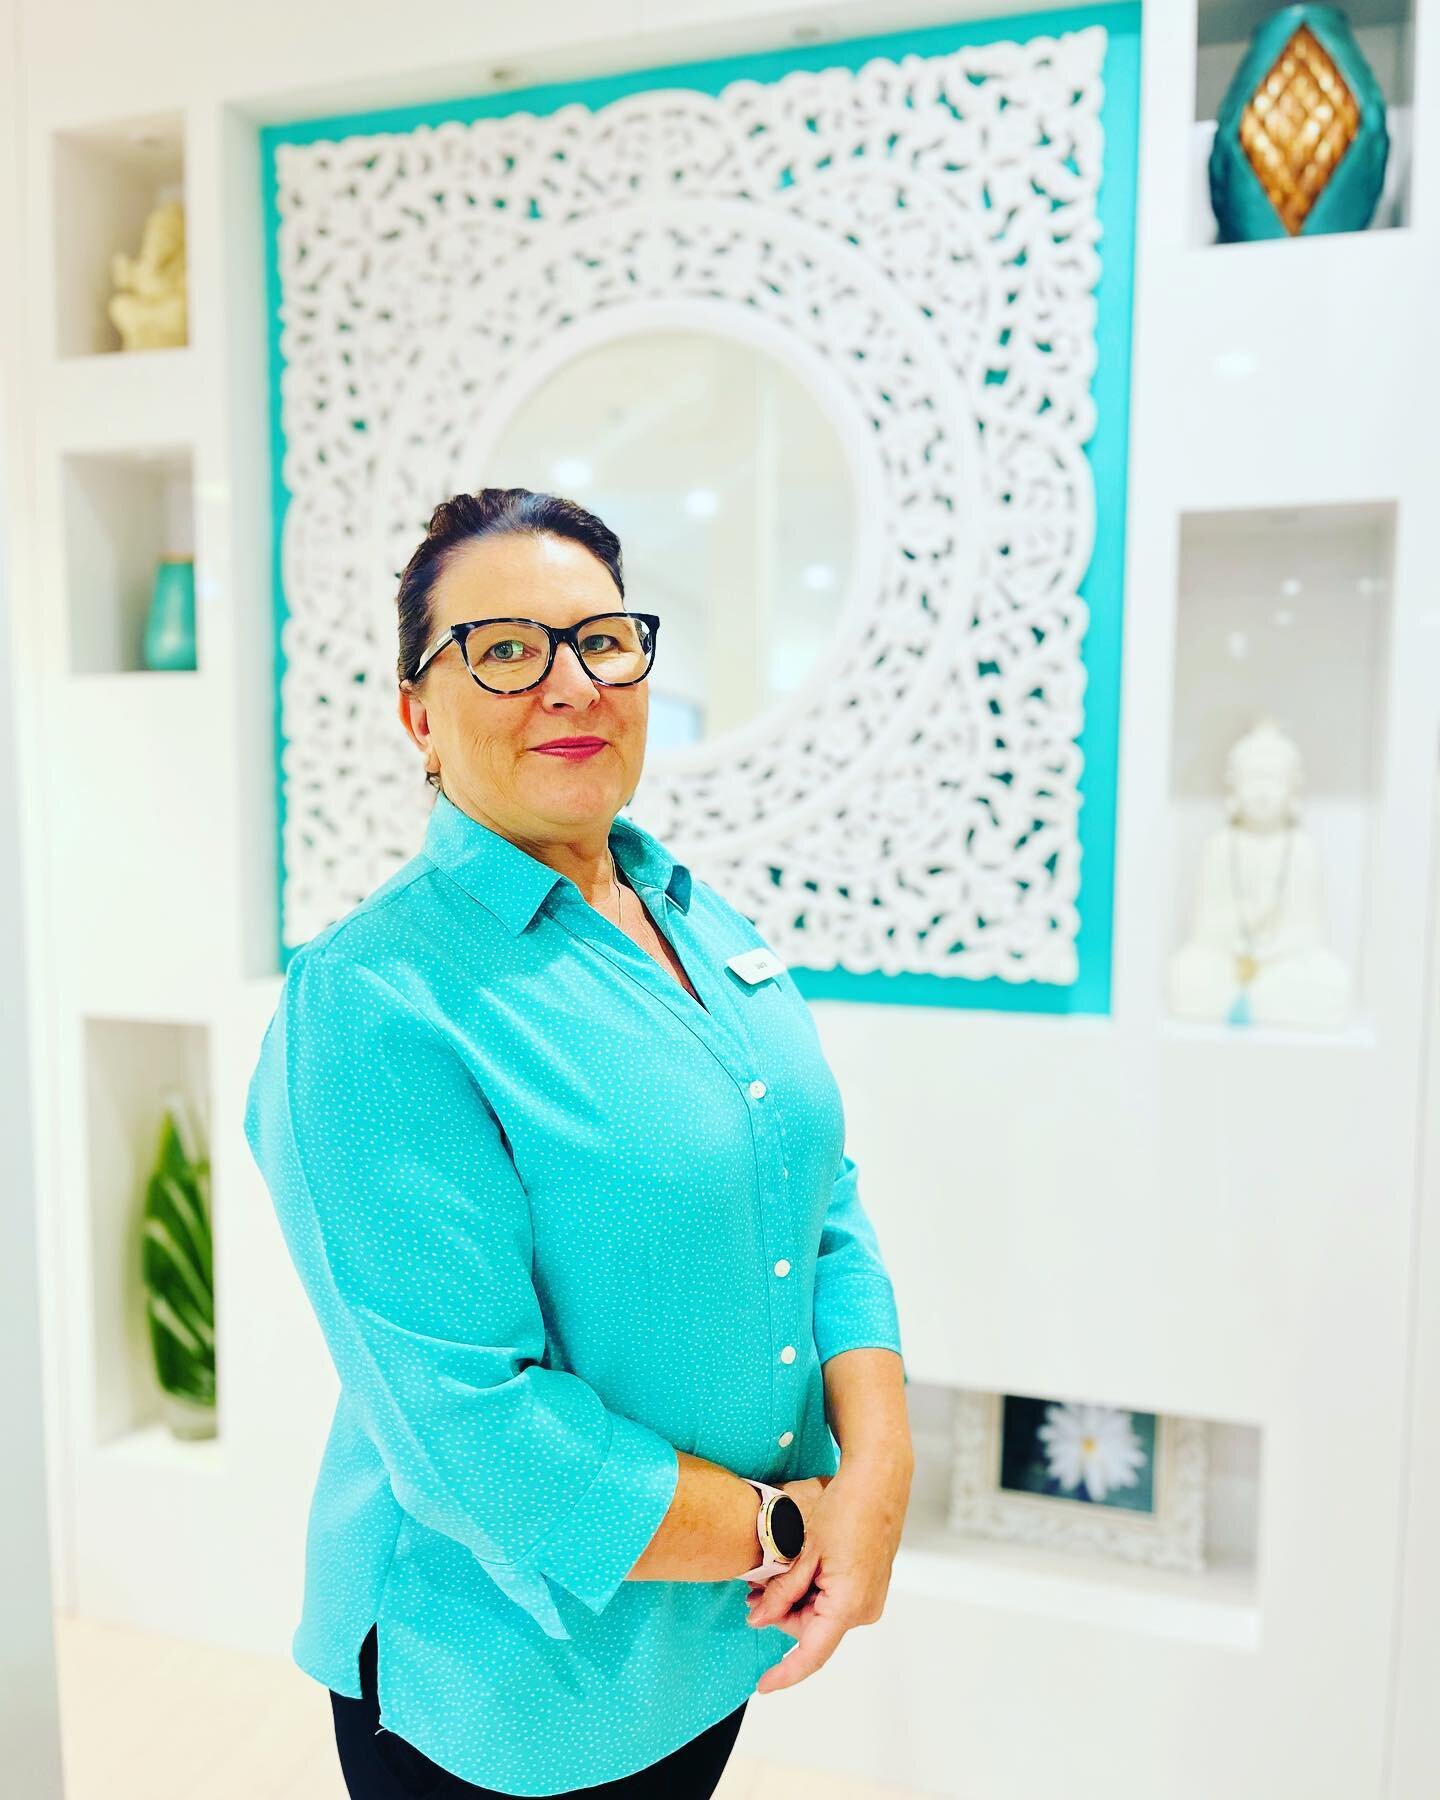 Meet Jaana, our  practice manager @anokhidental! 💖
This incredible lady works so hard behind the scenes to ensure that our days at Anokhi Dental run smoothly. 
Not only is Jaana the cheery voice that greets you at the other end of the phone when you